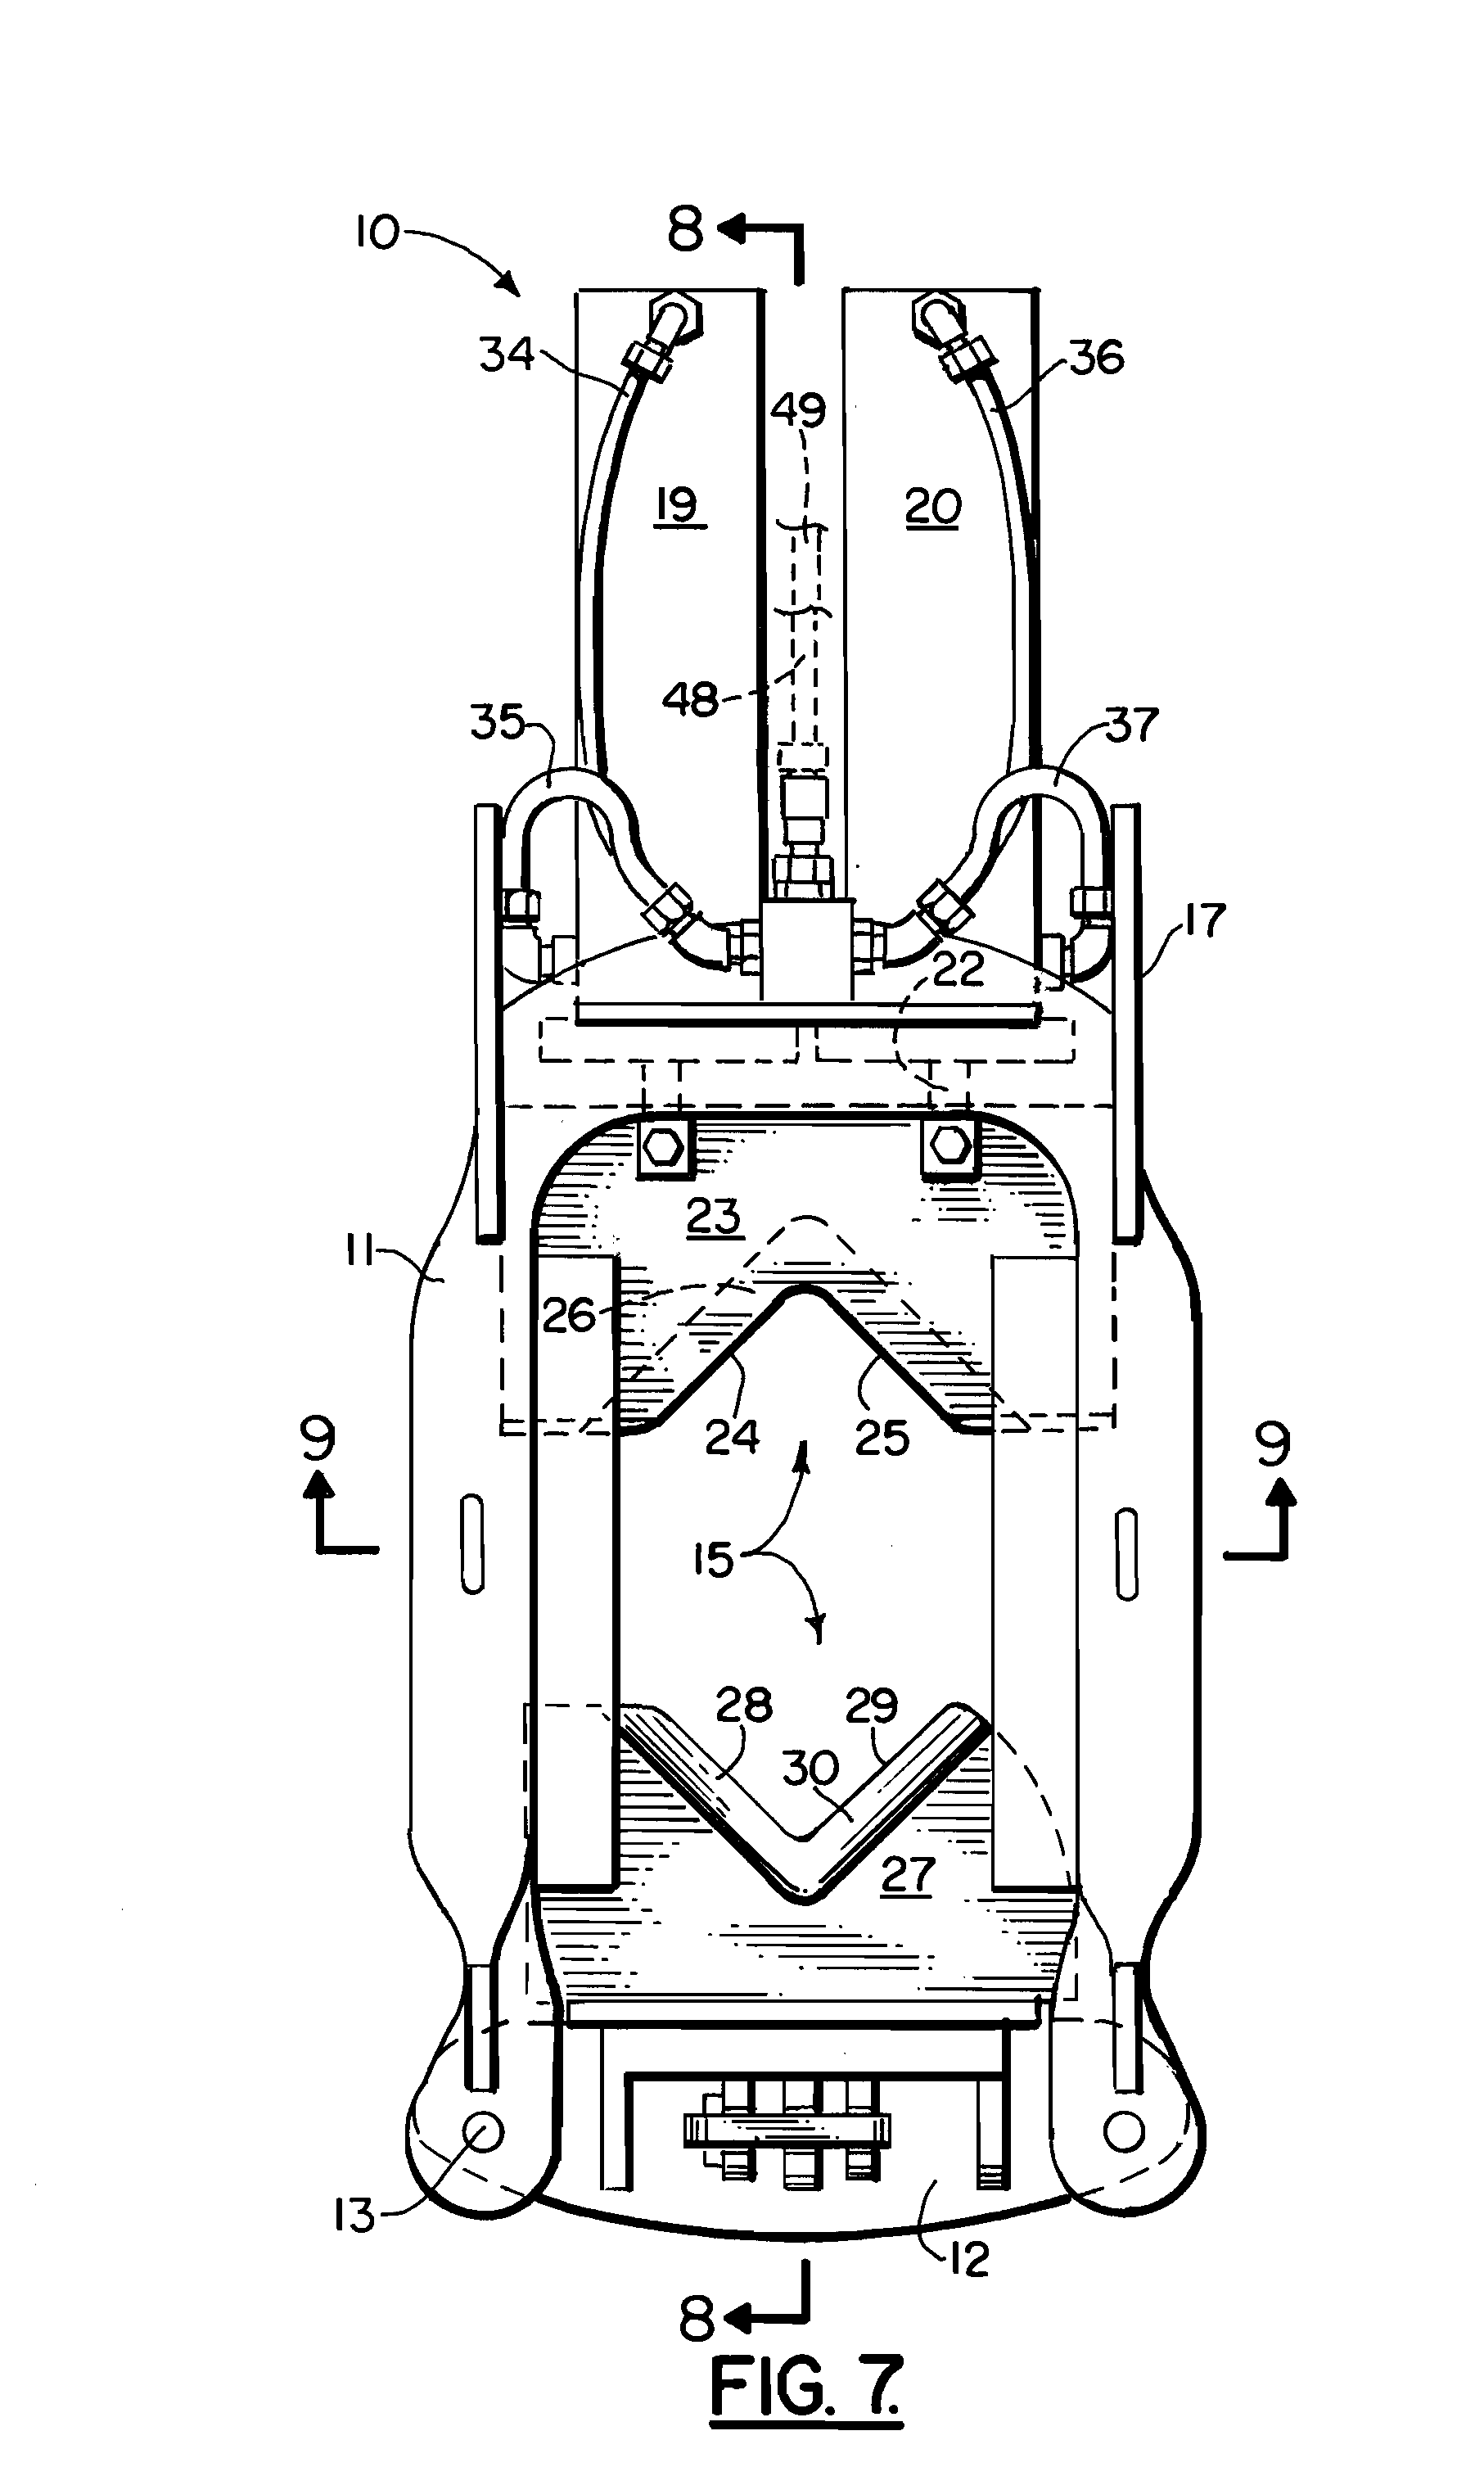 Method and apparatus for salvaging underwater pipelines